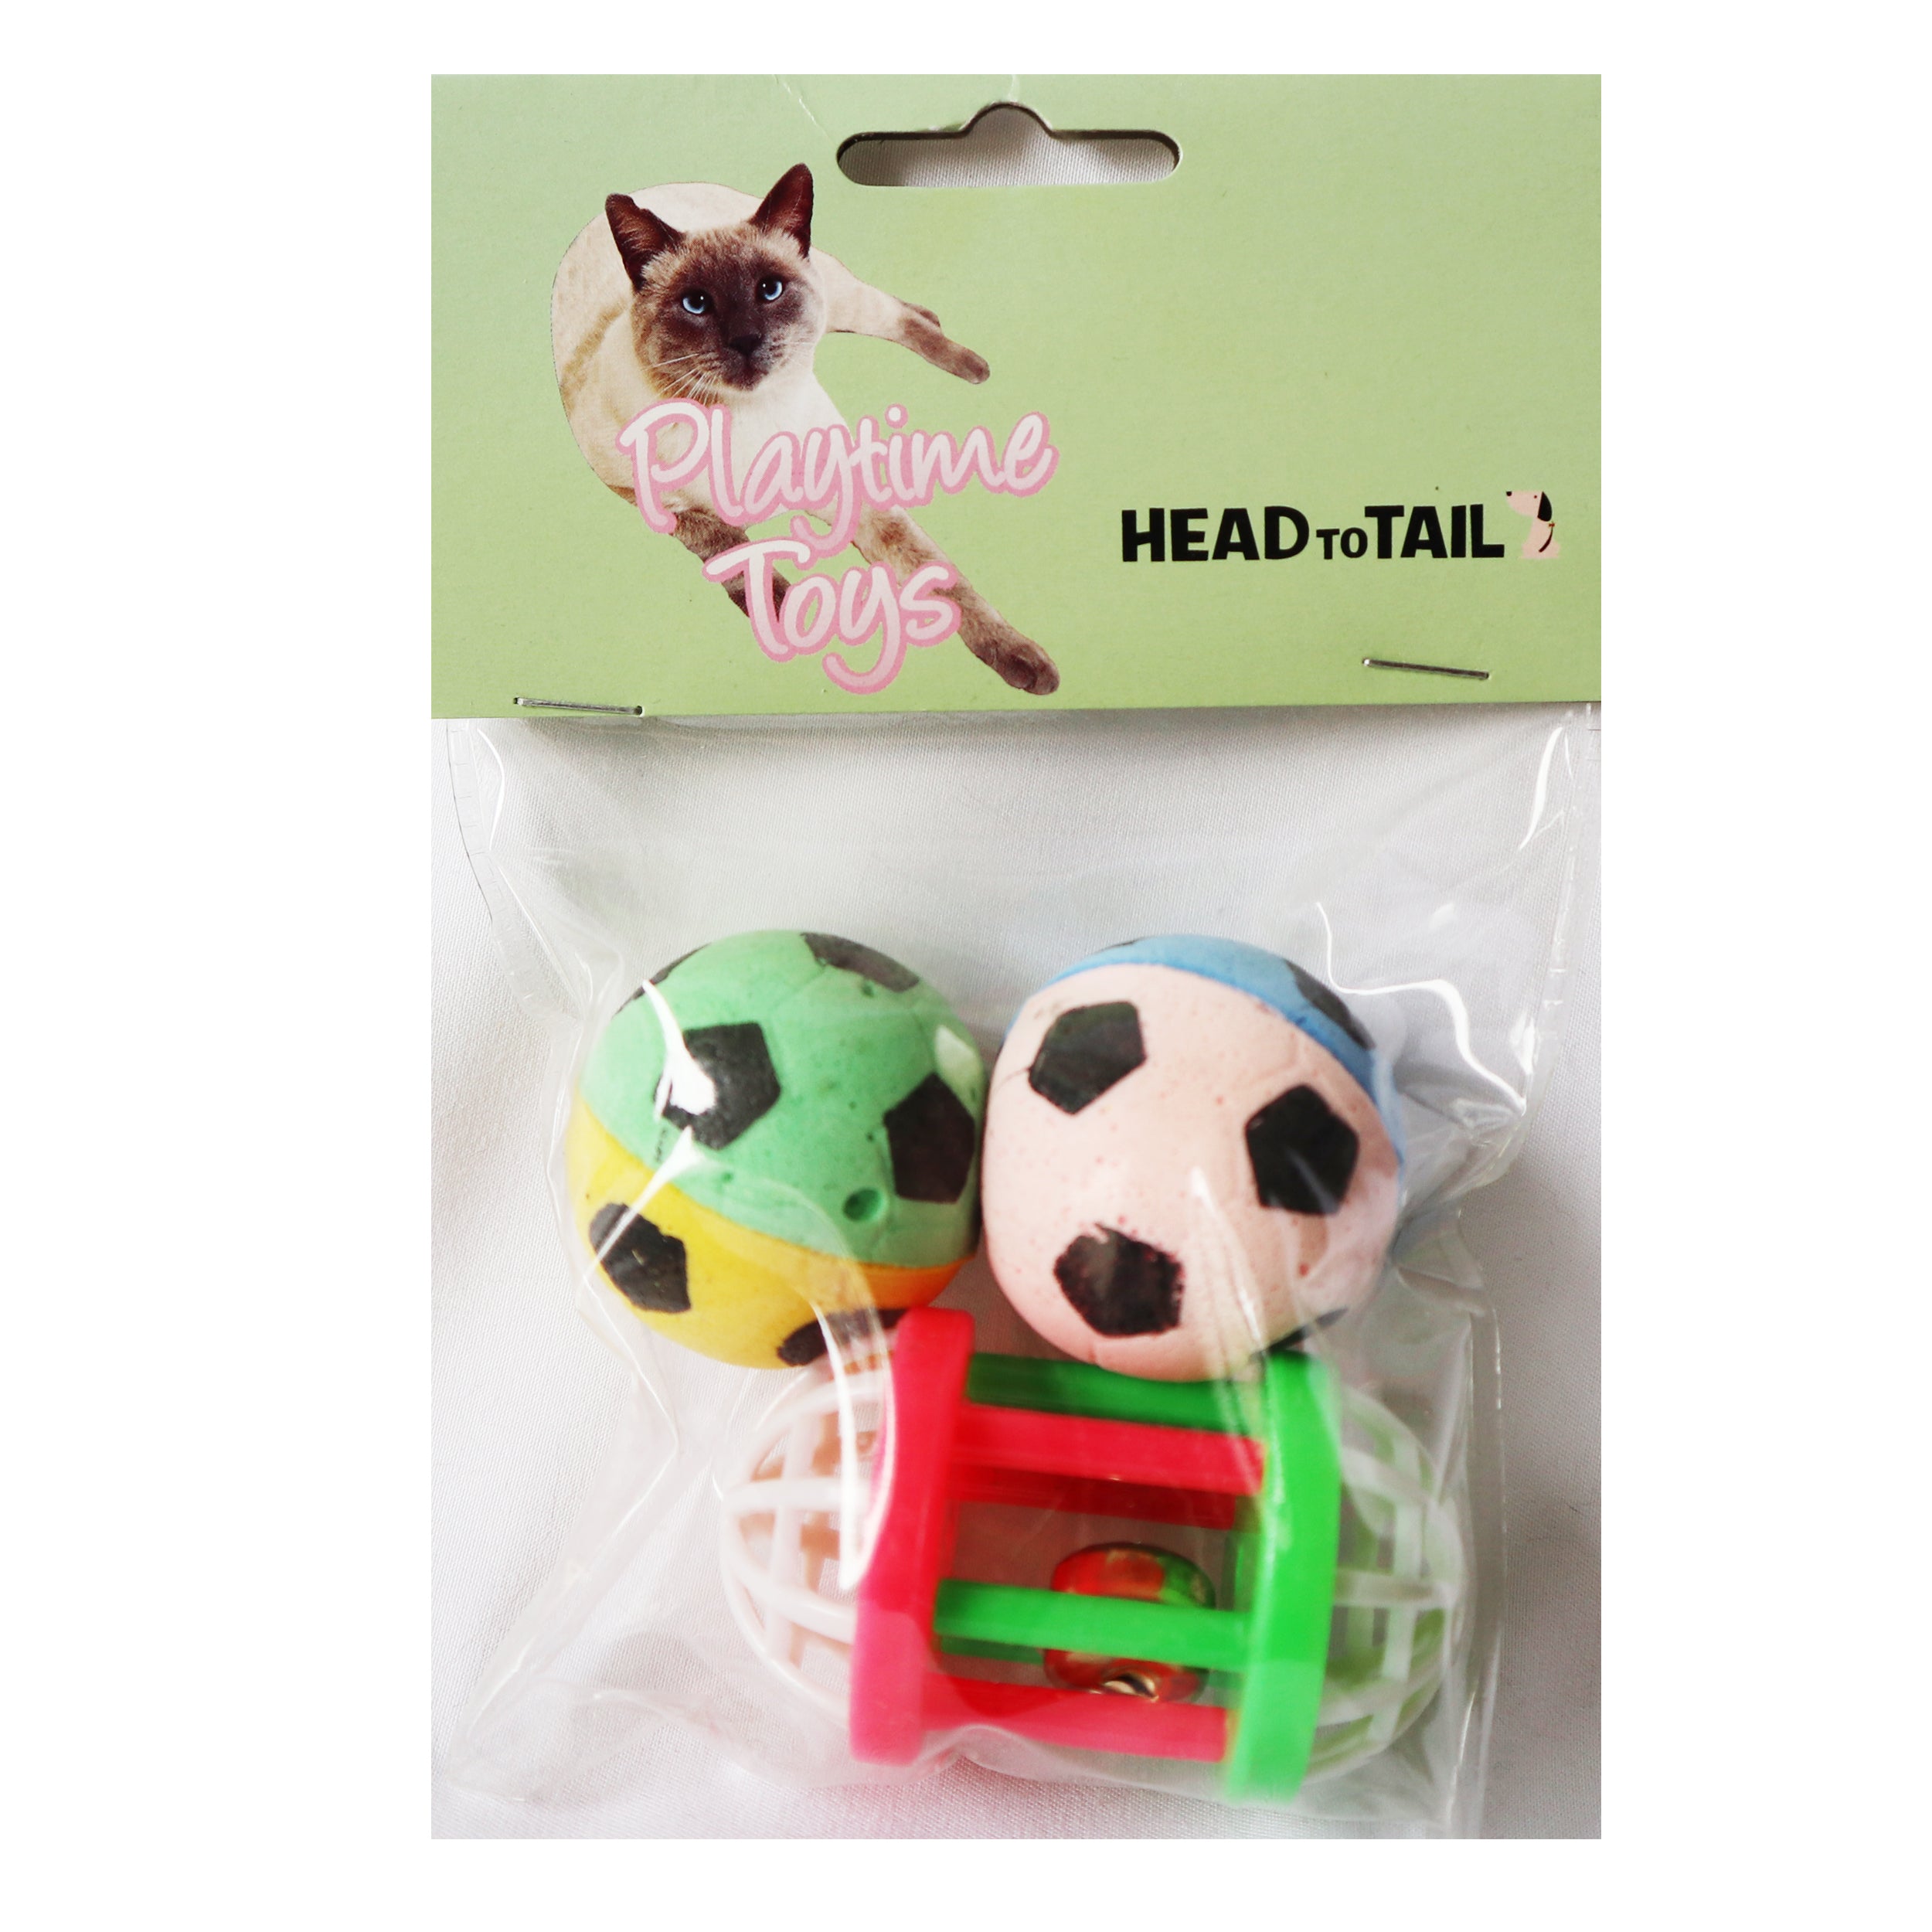 One Pack Of 3 Piece MultiColored 2 Soft Sponge Soccer Balls And One Bell ball Roller Toys for Cats Fun Interactive Cat Toys 